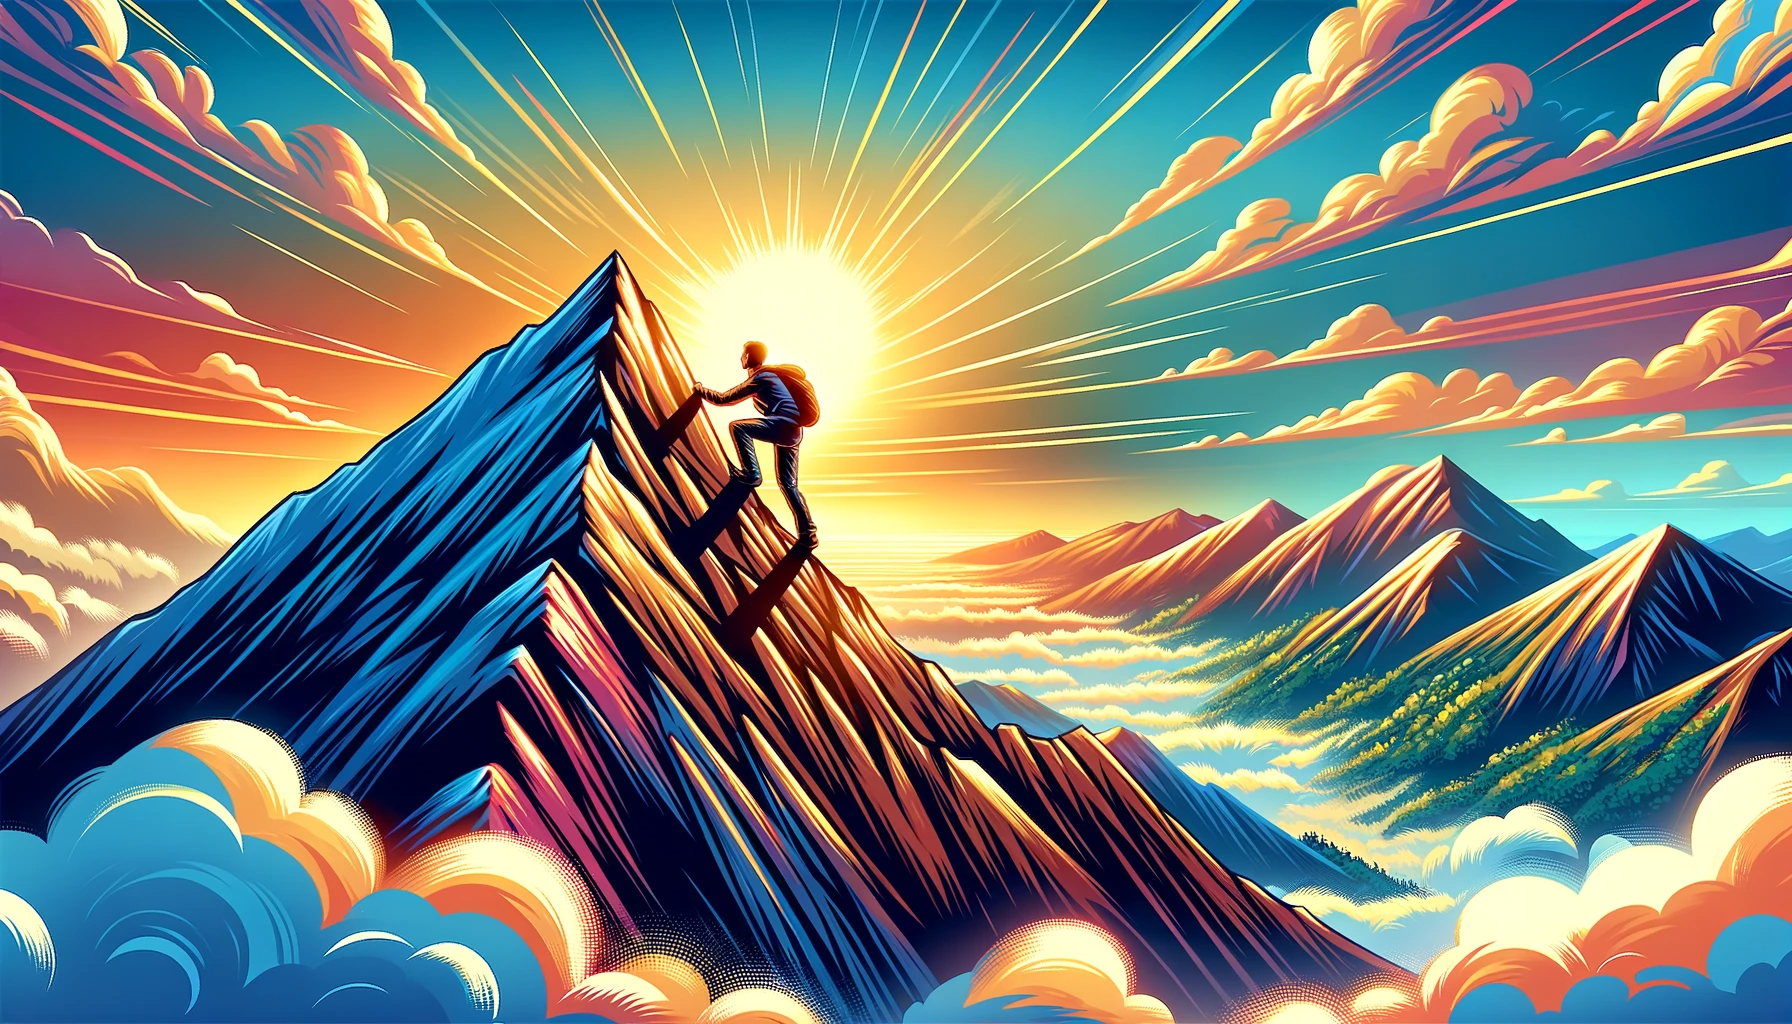 inspirational illustration of a person climbing a peak